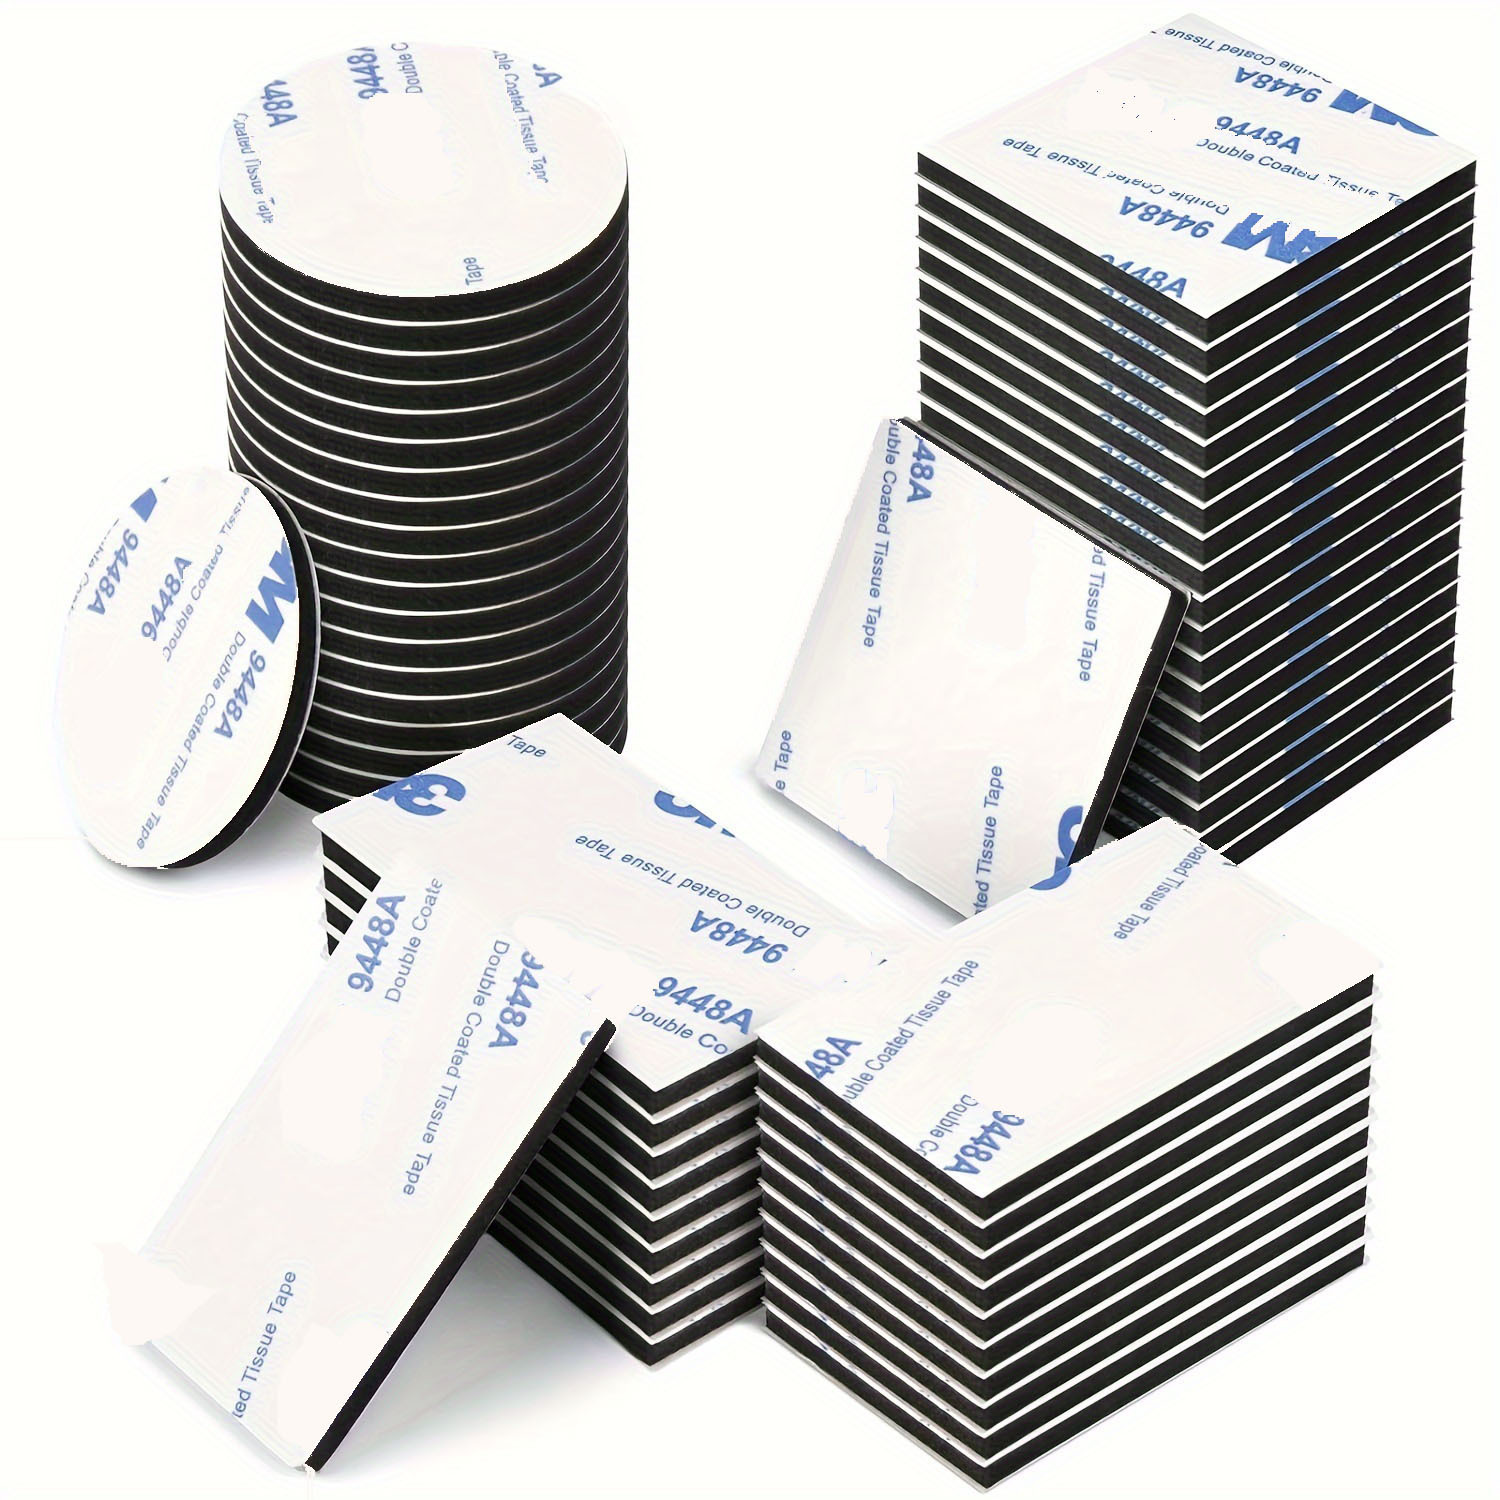 

56-piece Strong Double-sided Adhesive Tape Set - Black Eva Foam, Versatile Shapes For Walls, Floors & Doors